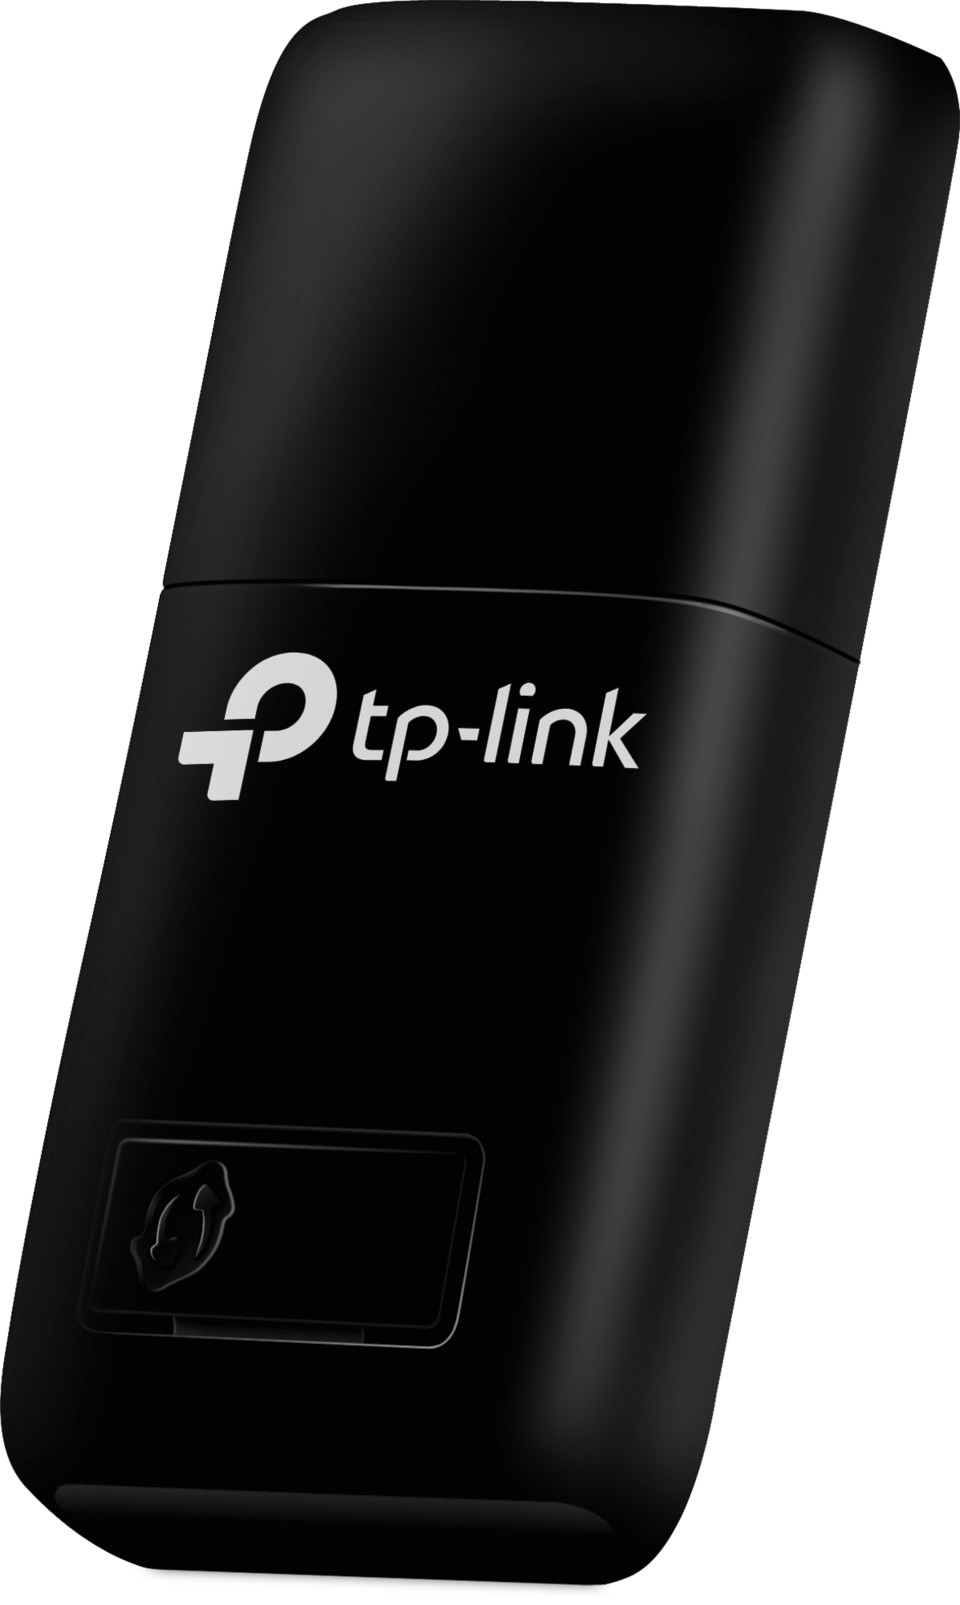  TP-Link TL-WN823N N300 Mini USB Wireless WiFi network Adapter  for pc, Ideal for Raspberry Pi,Black : Electronics